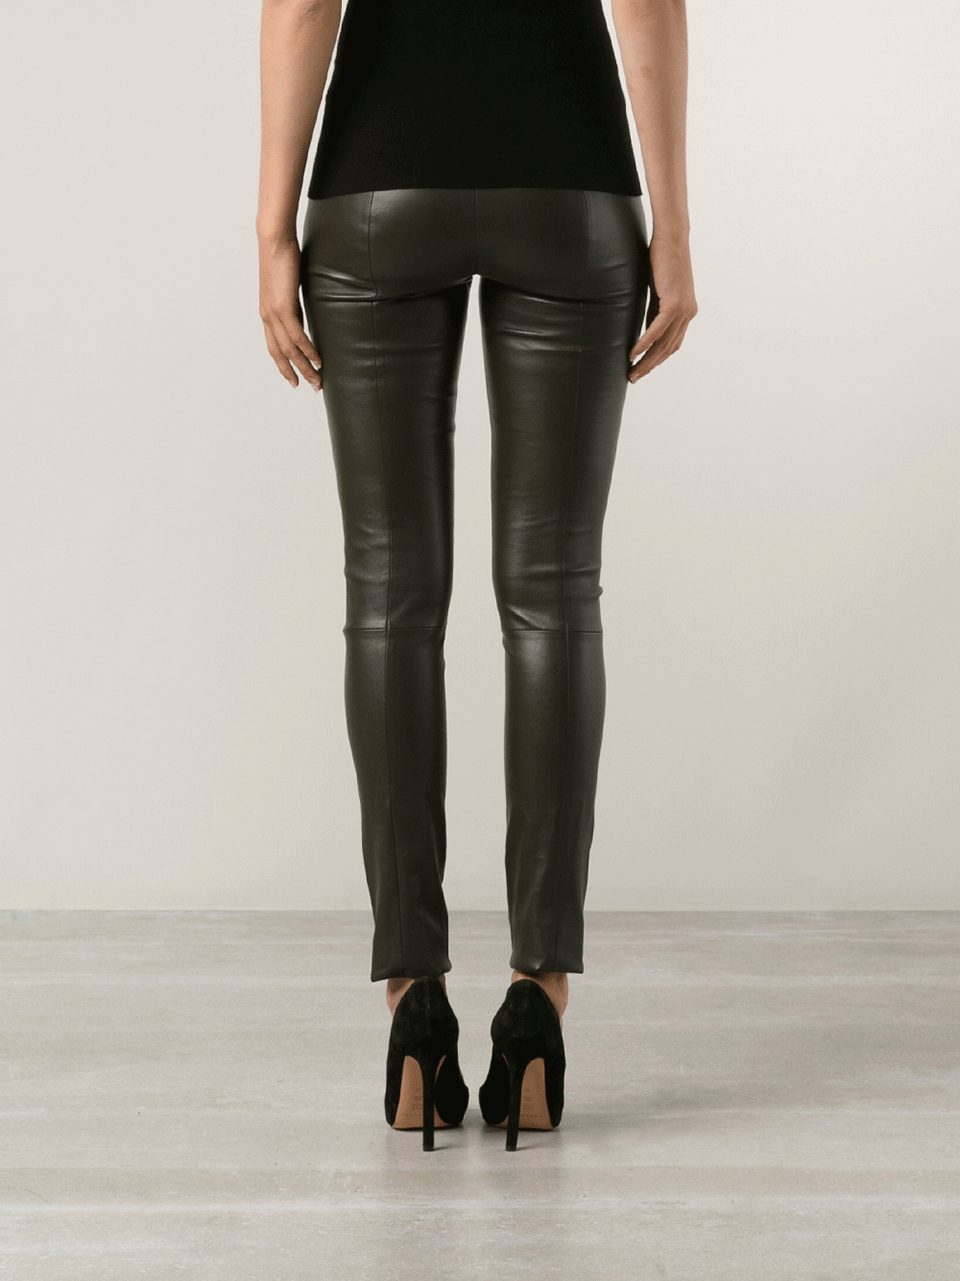 Lyst - The Row Pull On Moto Loden Leather Pants in Gray